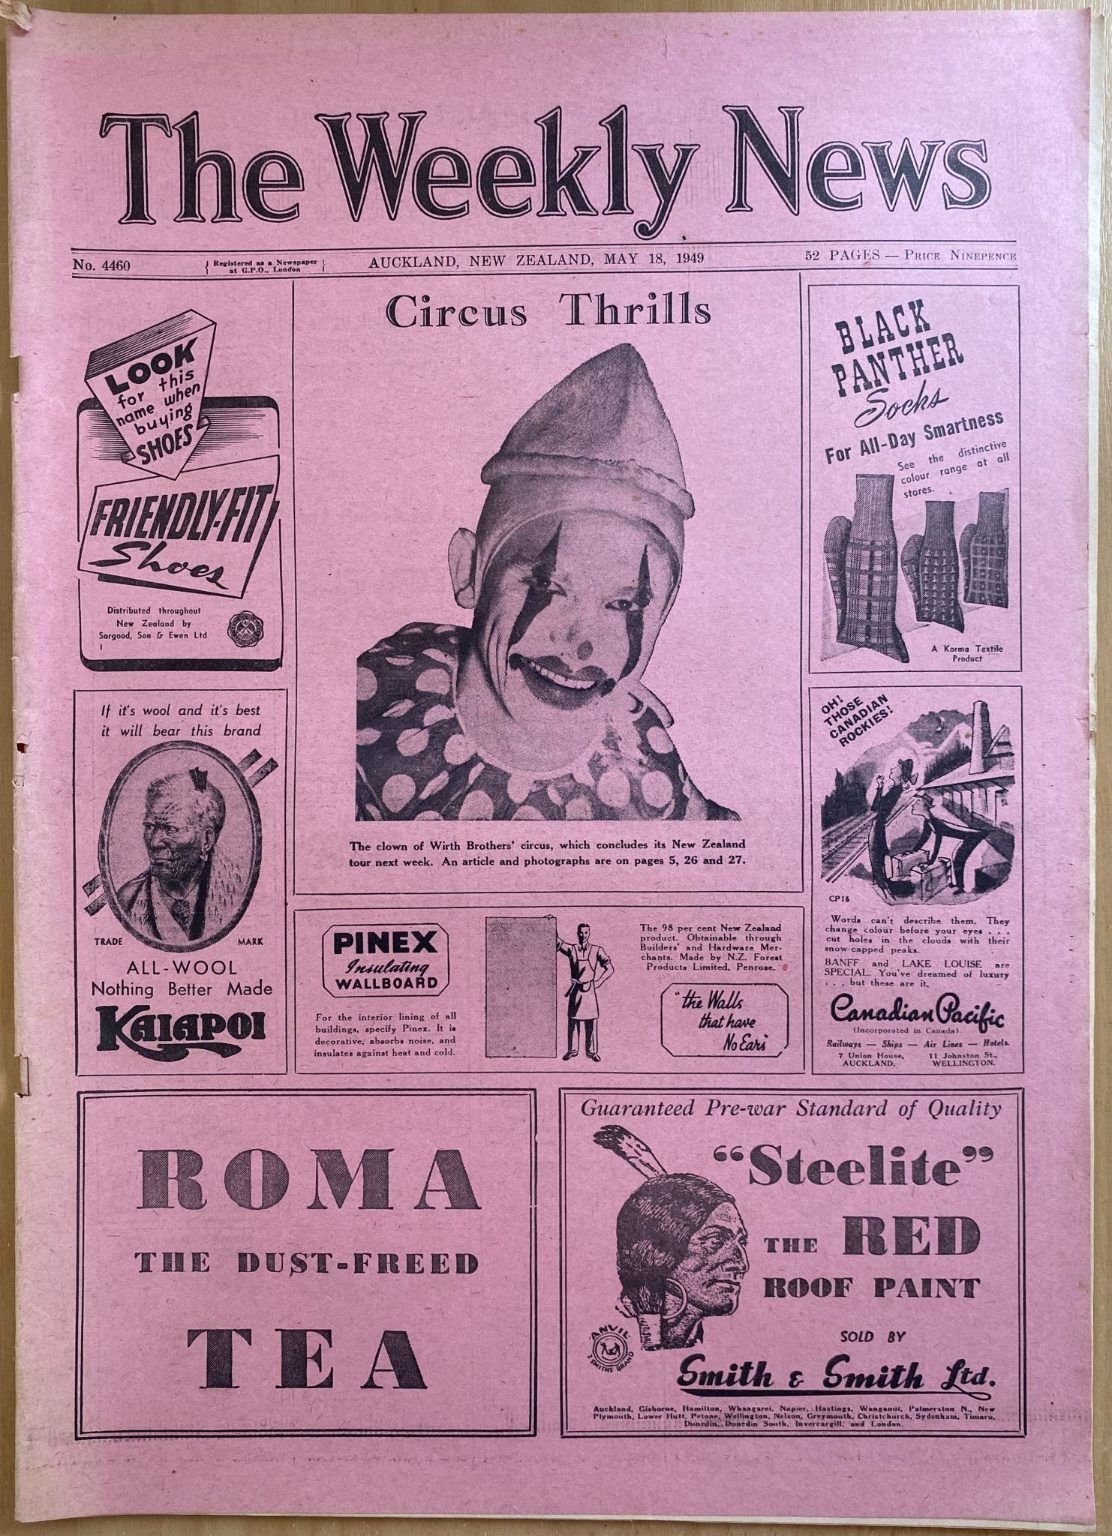 OLD NEWSPAPER: The Weekly News, No. 4460, 18 May 1949